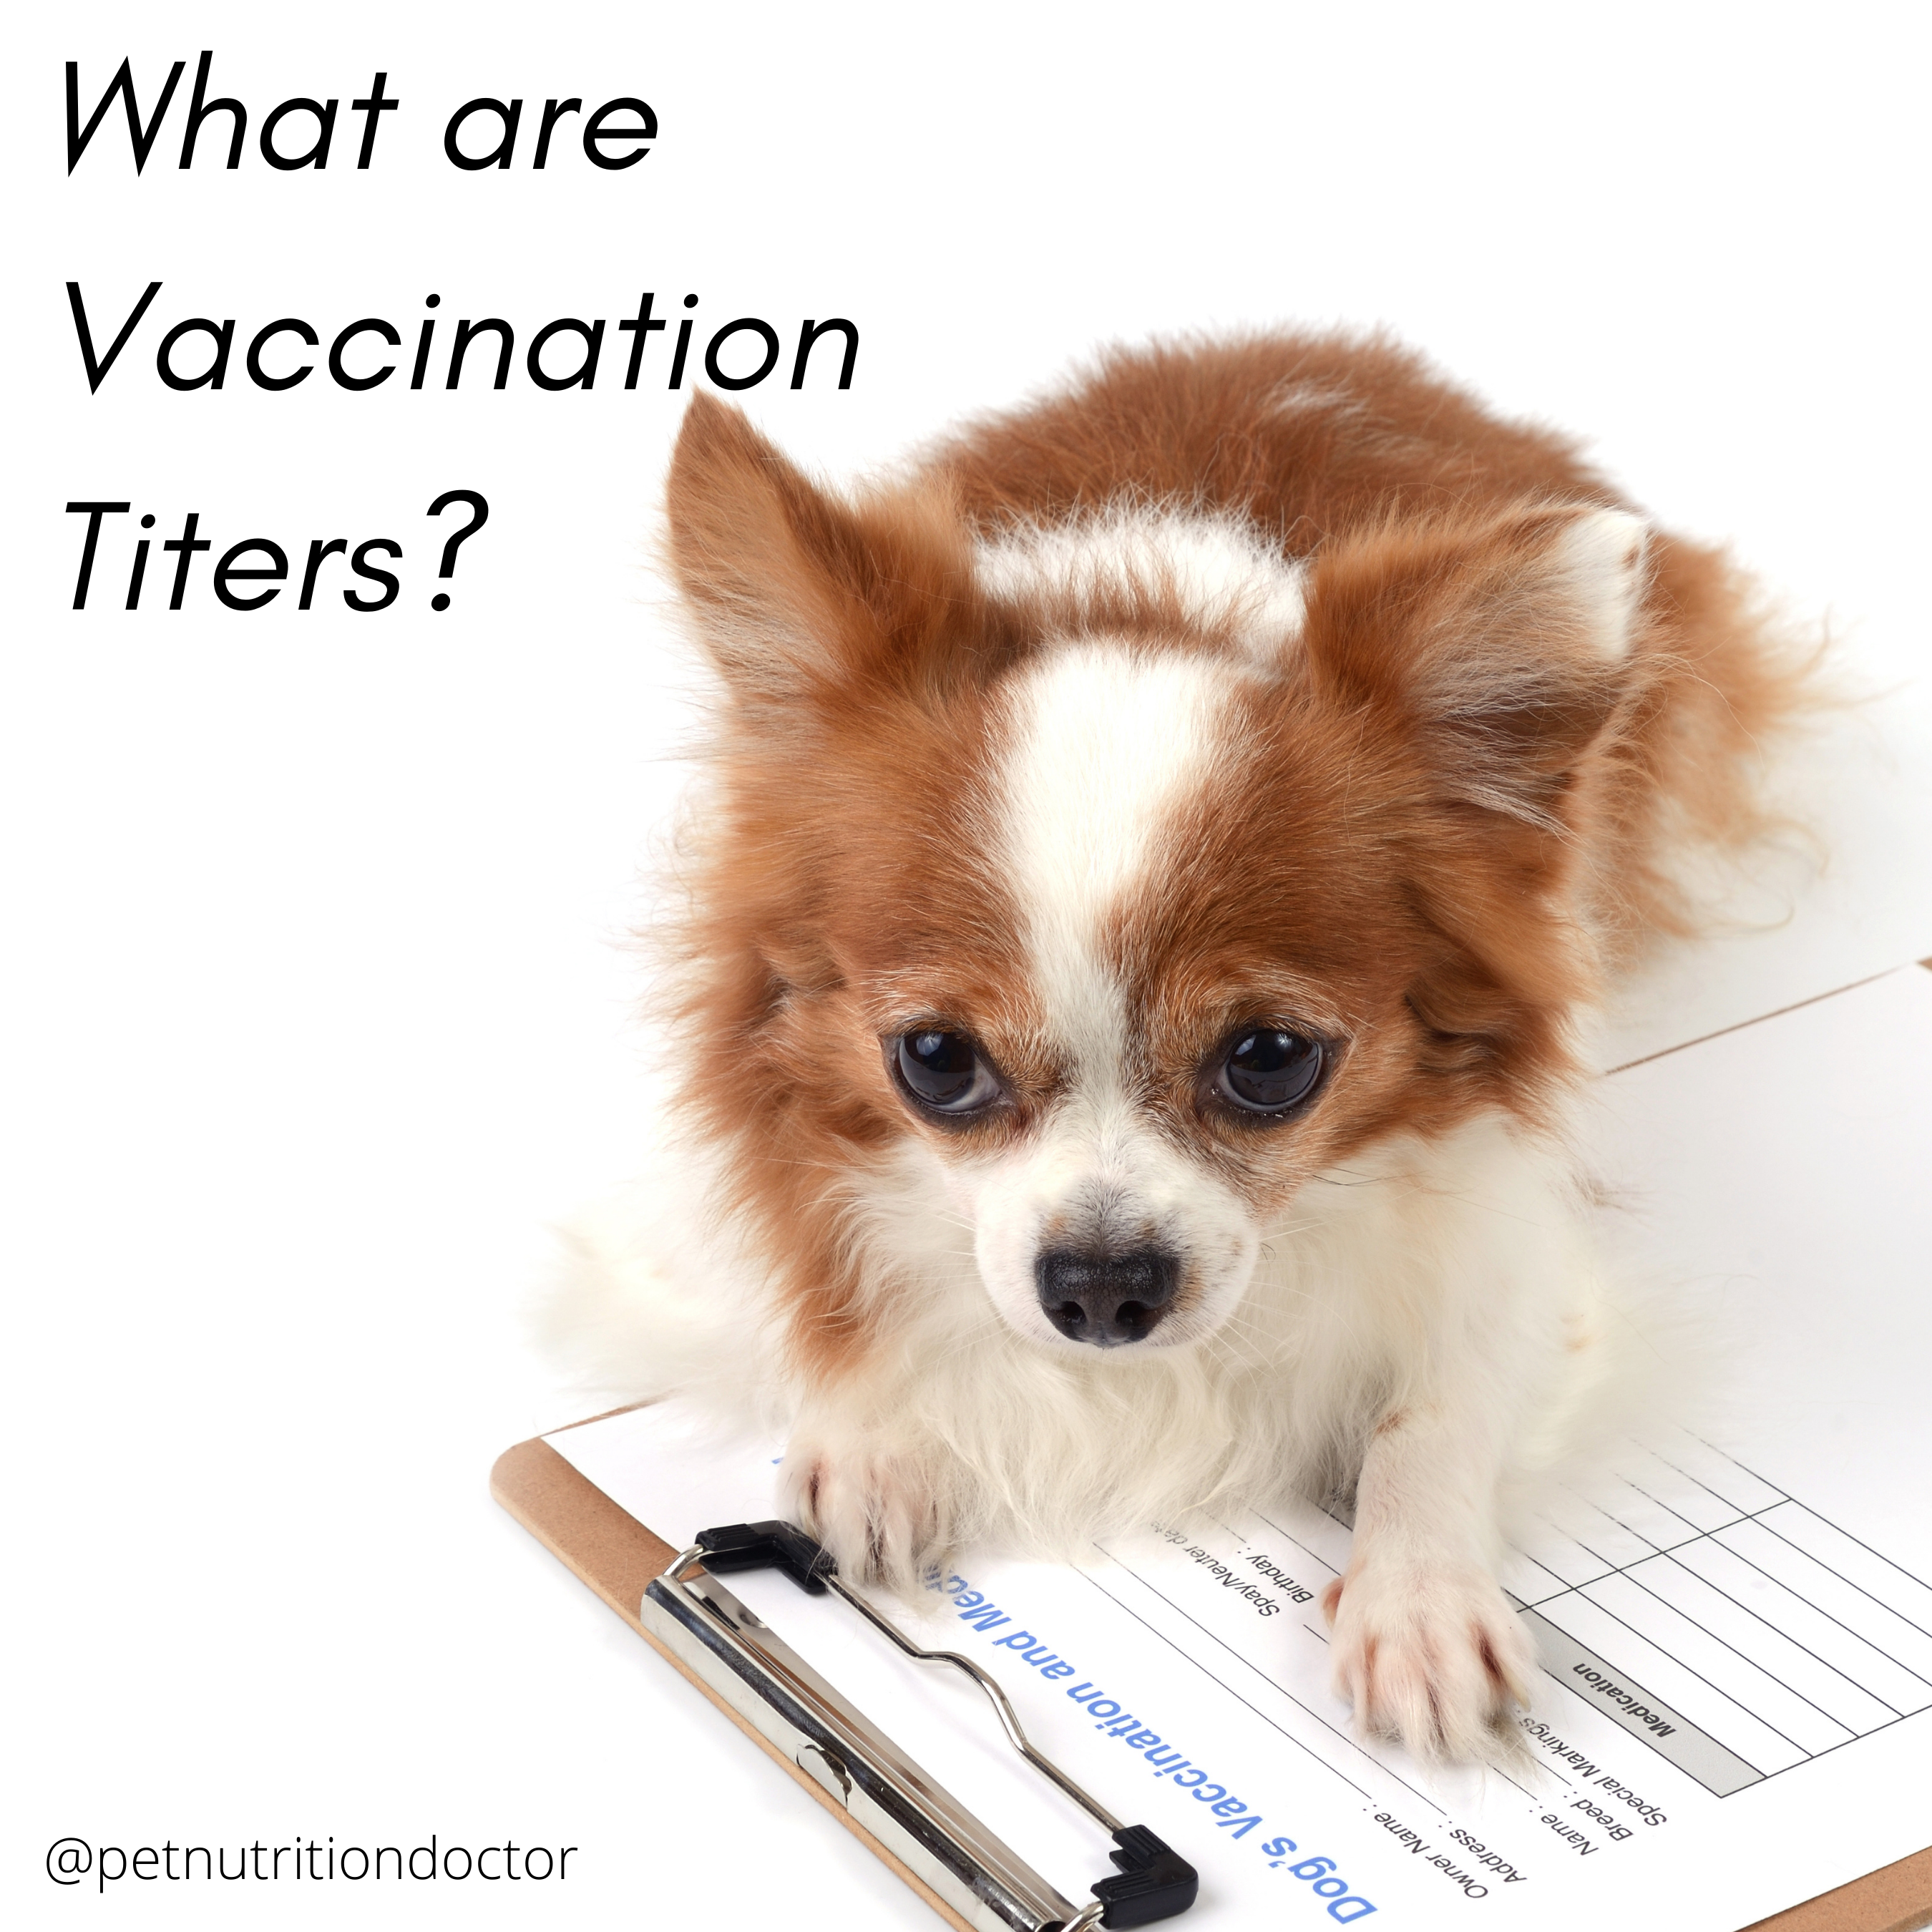 What are Vaccination Titers?